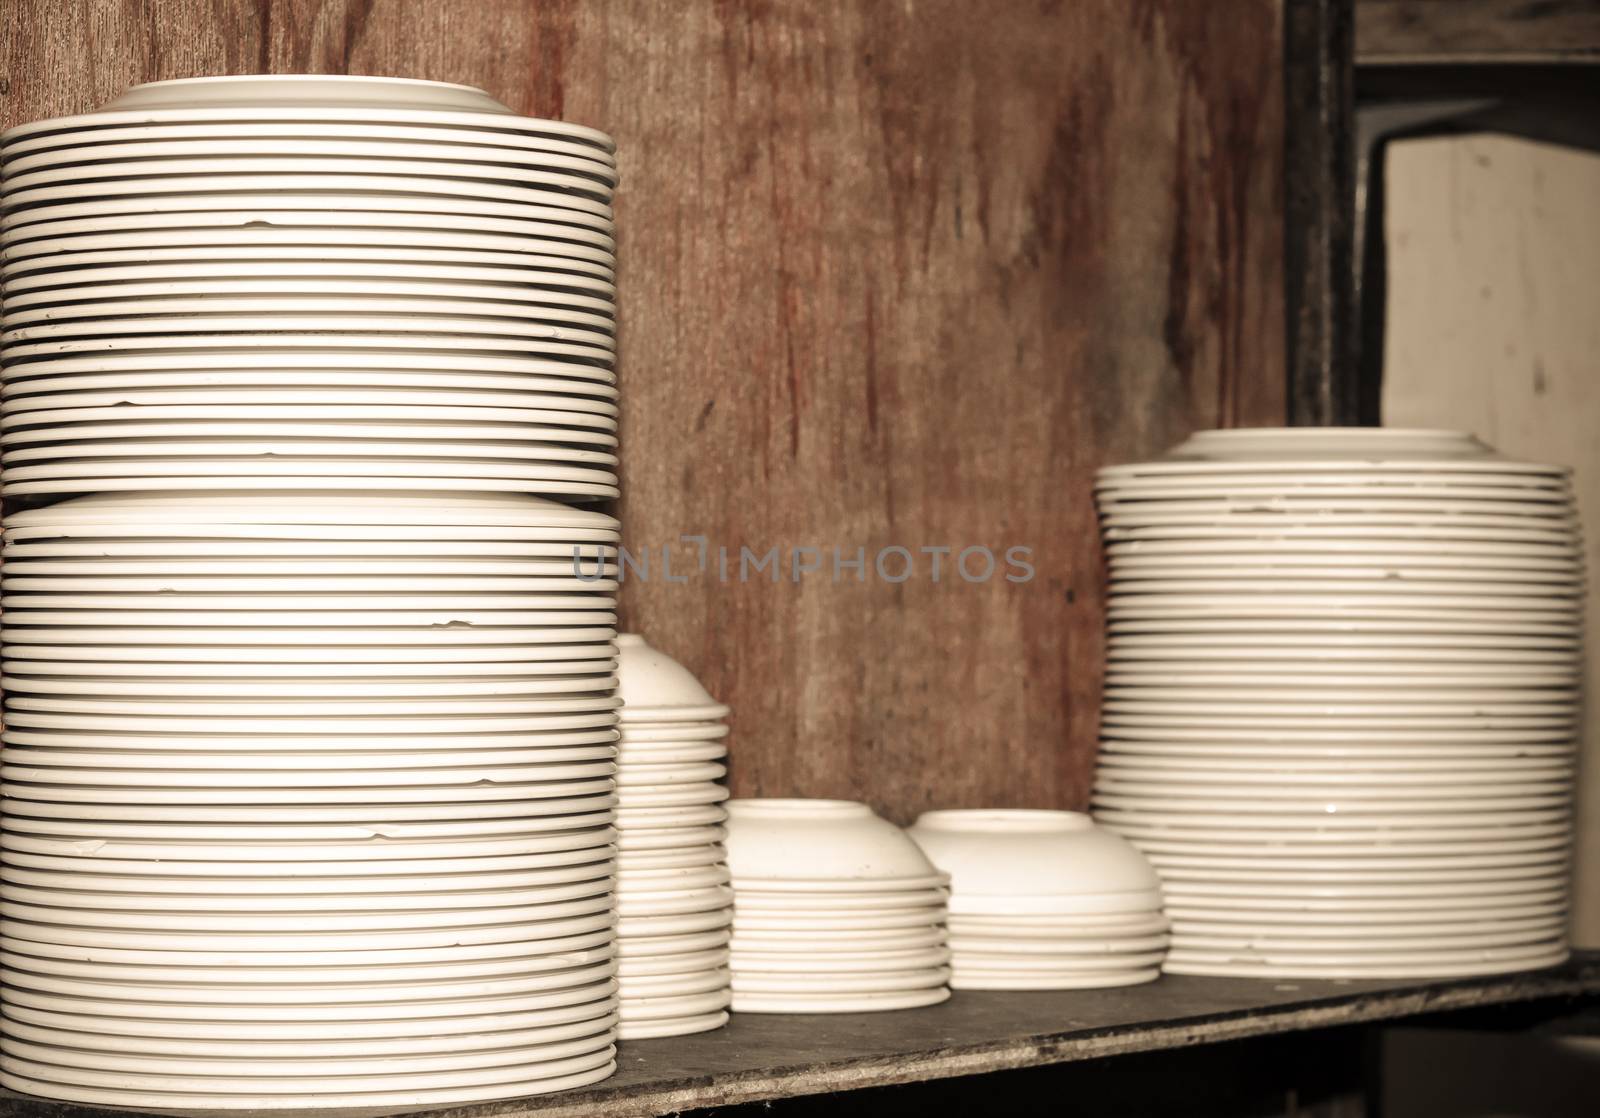 The white plastic plates stacked on wood.